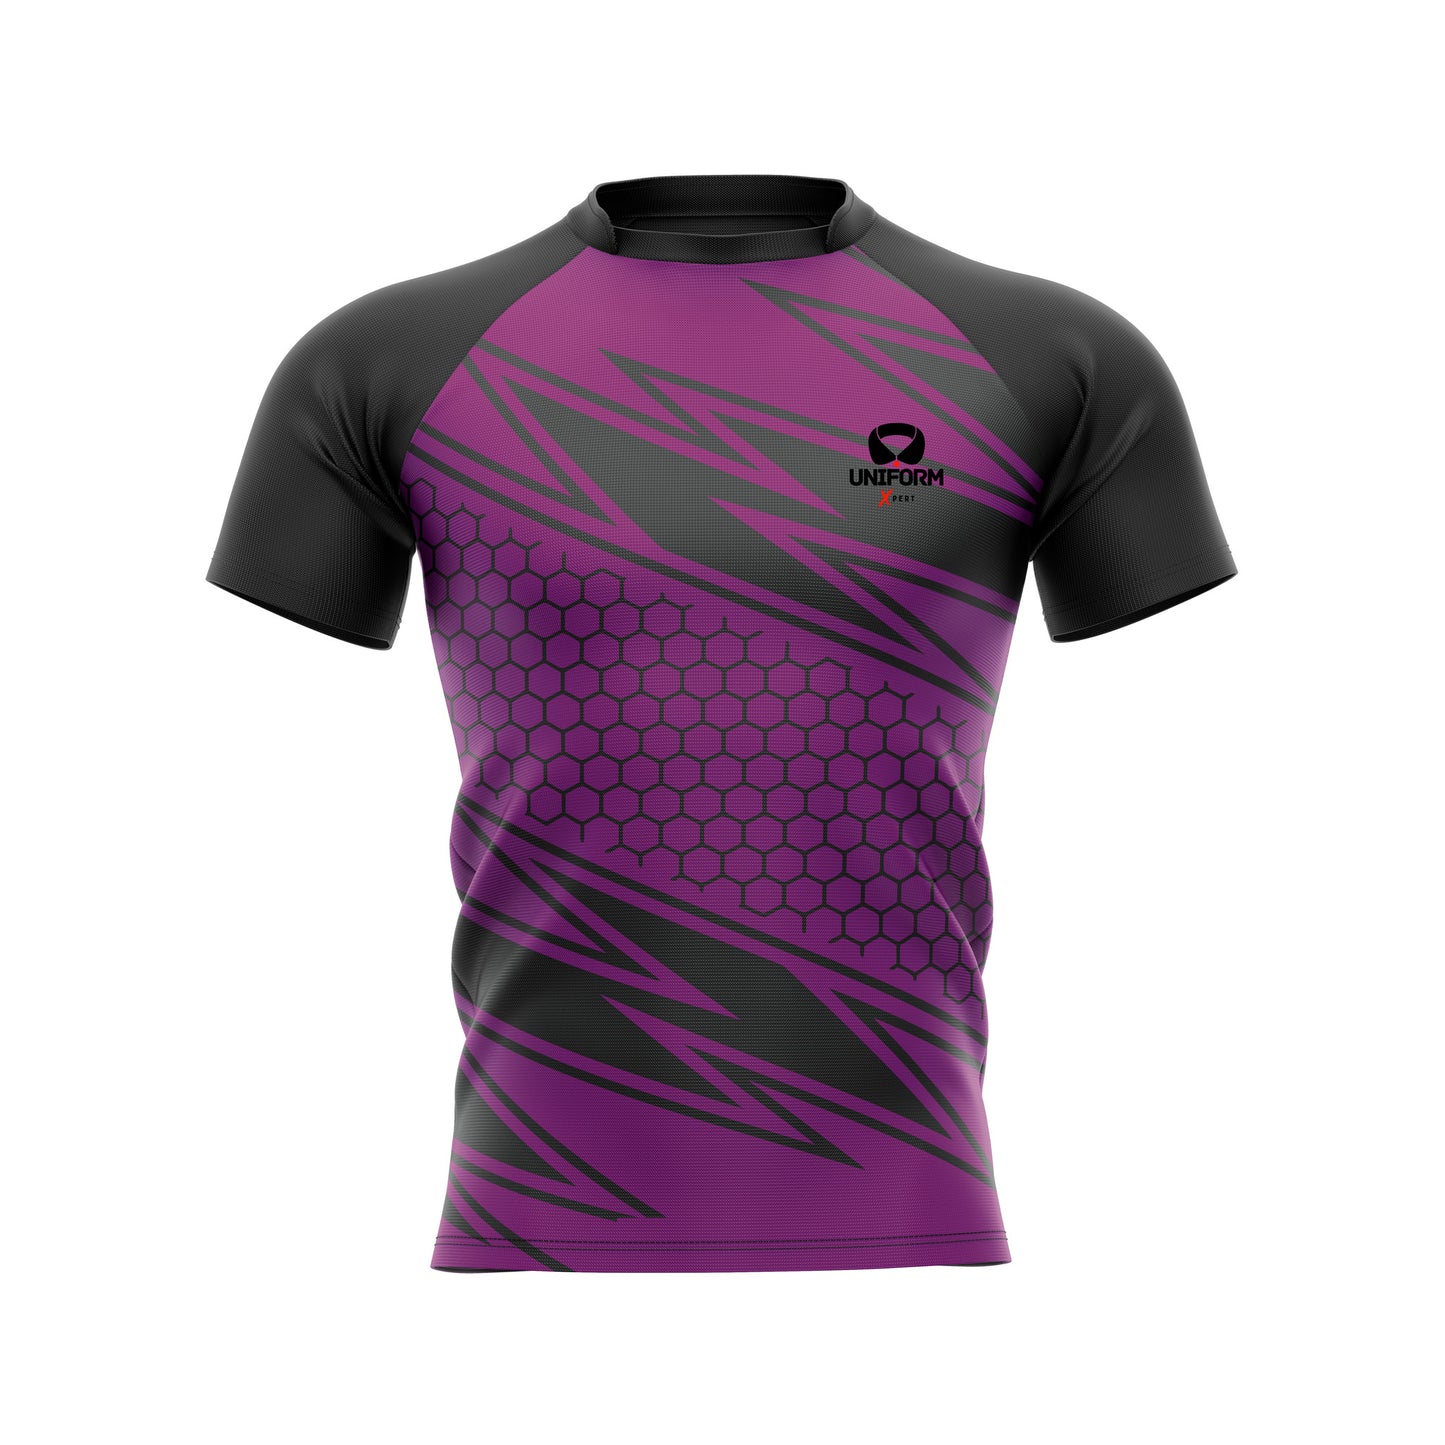 Pro-Fit Rugby Jerseys | Customized Rugby Shirts for Teams